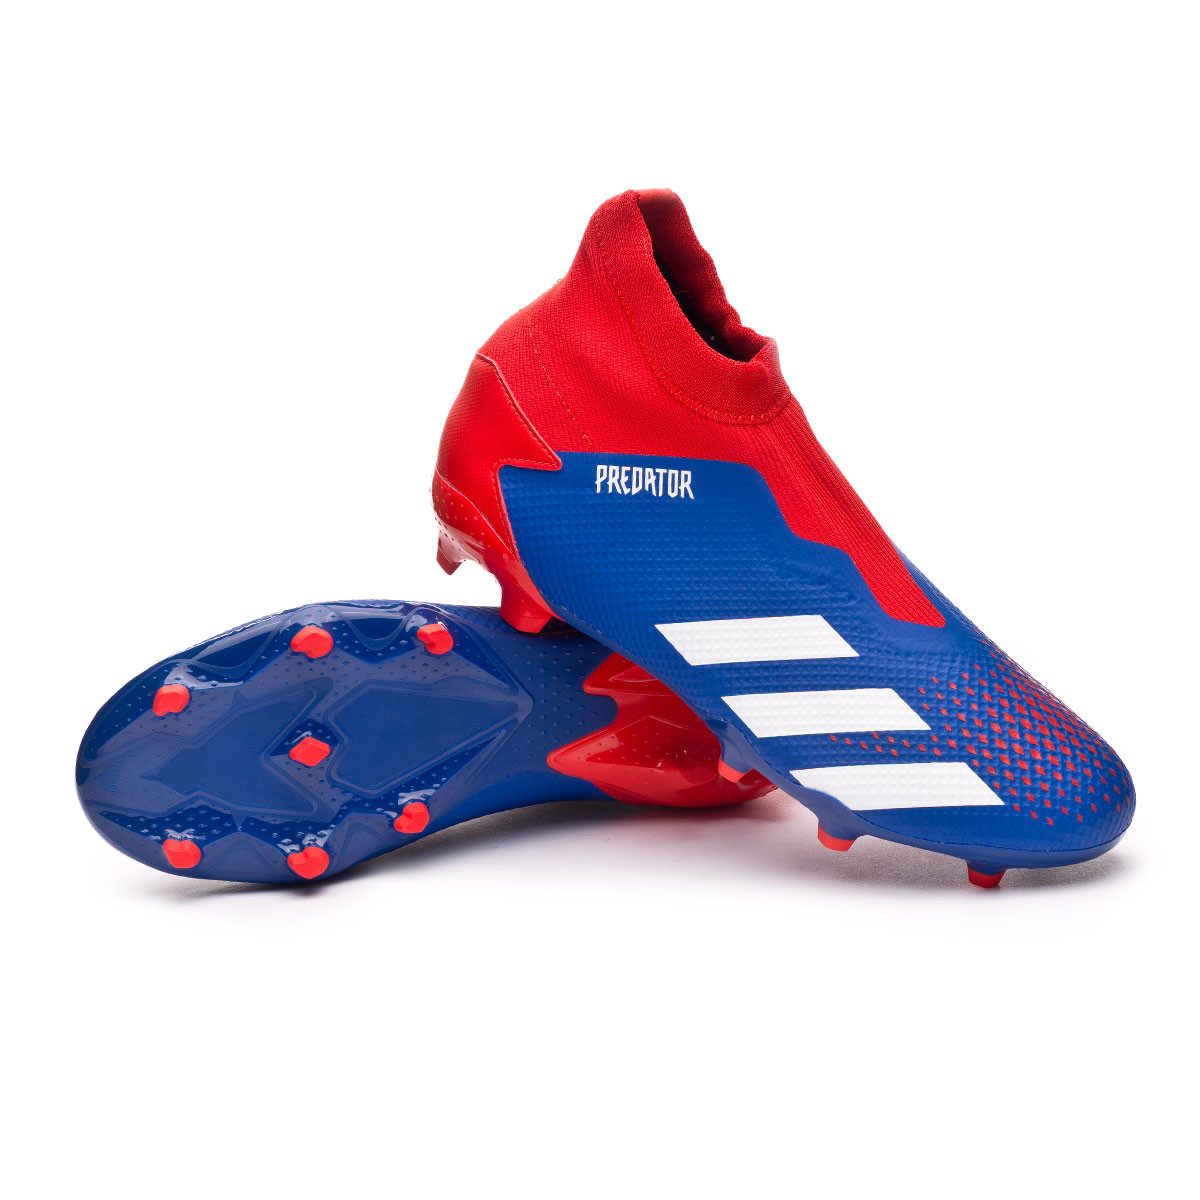 blue laceless football boots